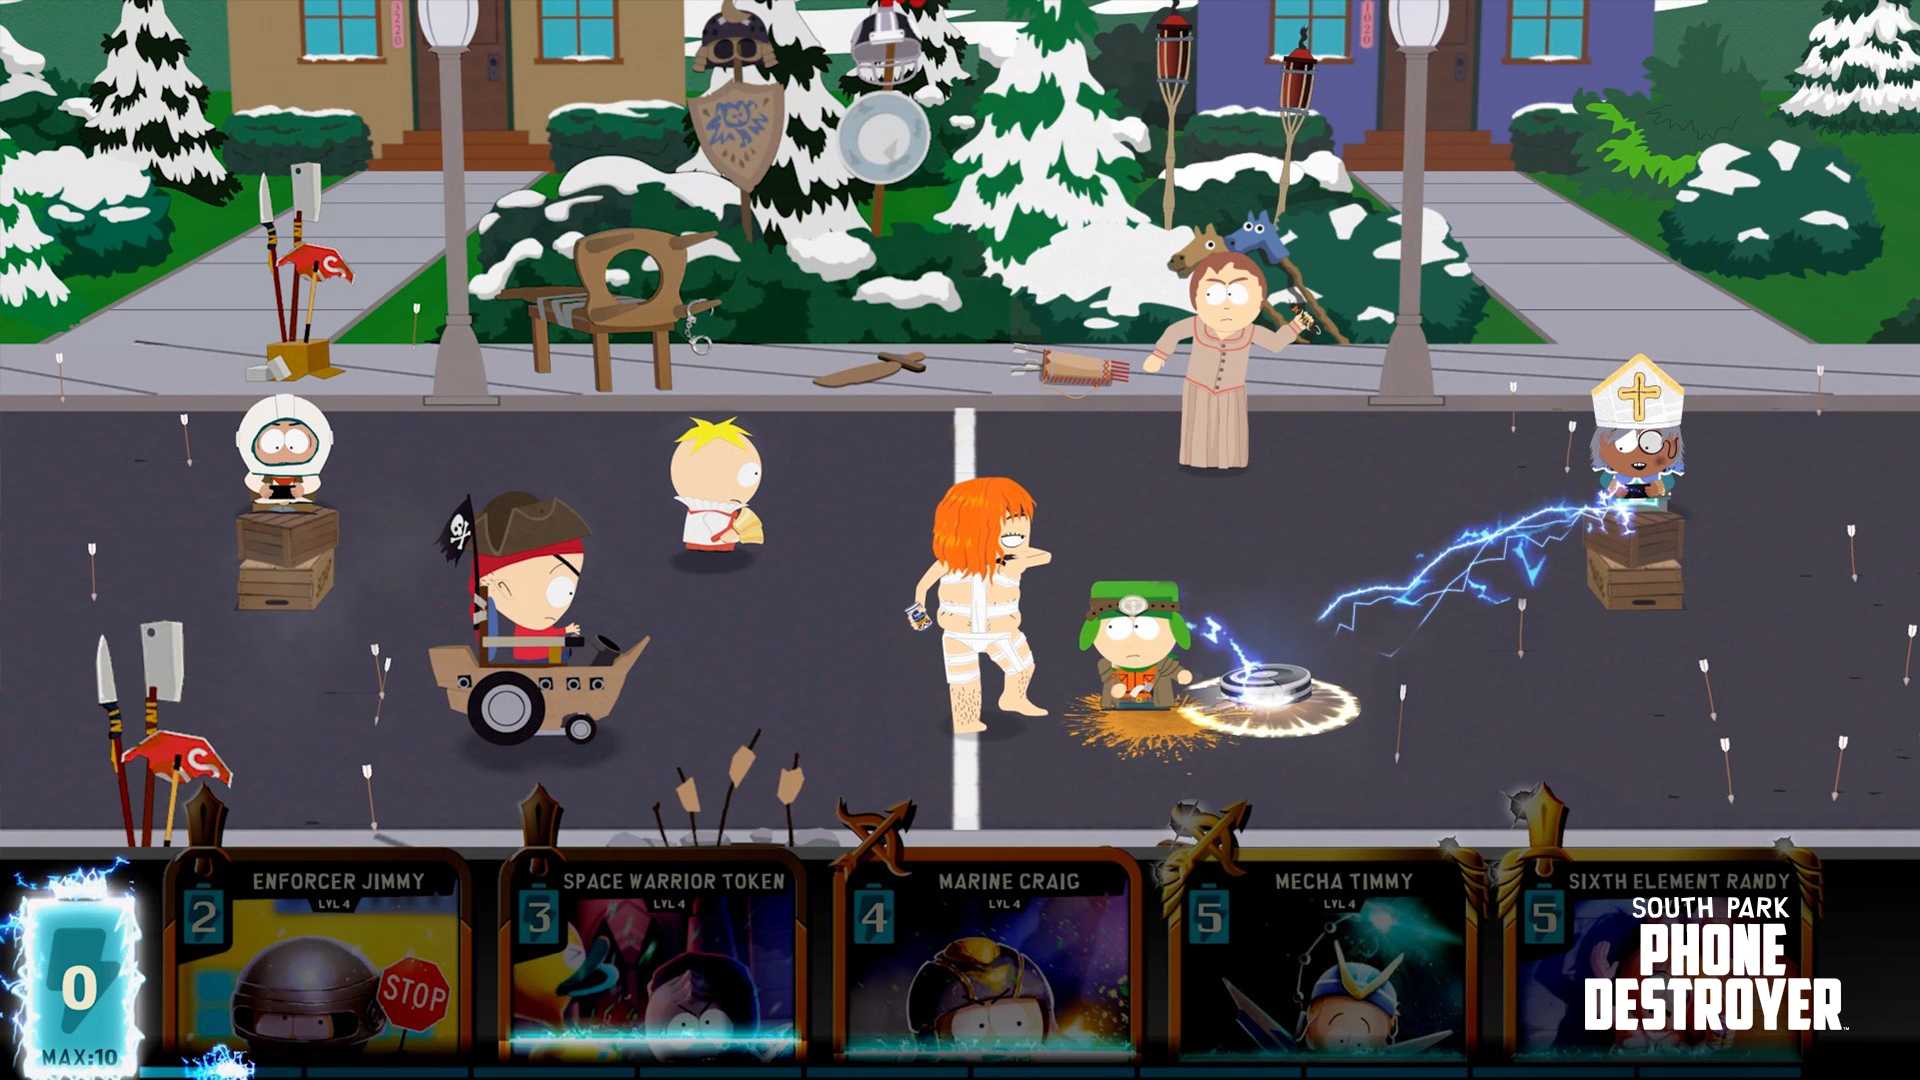 South park: the stick of truth - pcgamingwiki pcgw - bugs, fixes, crashes, mods, guides and improvements for every pc game